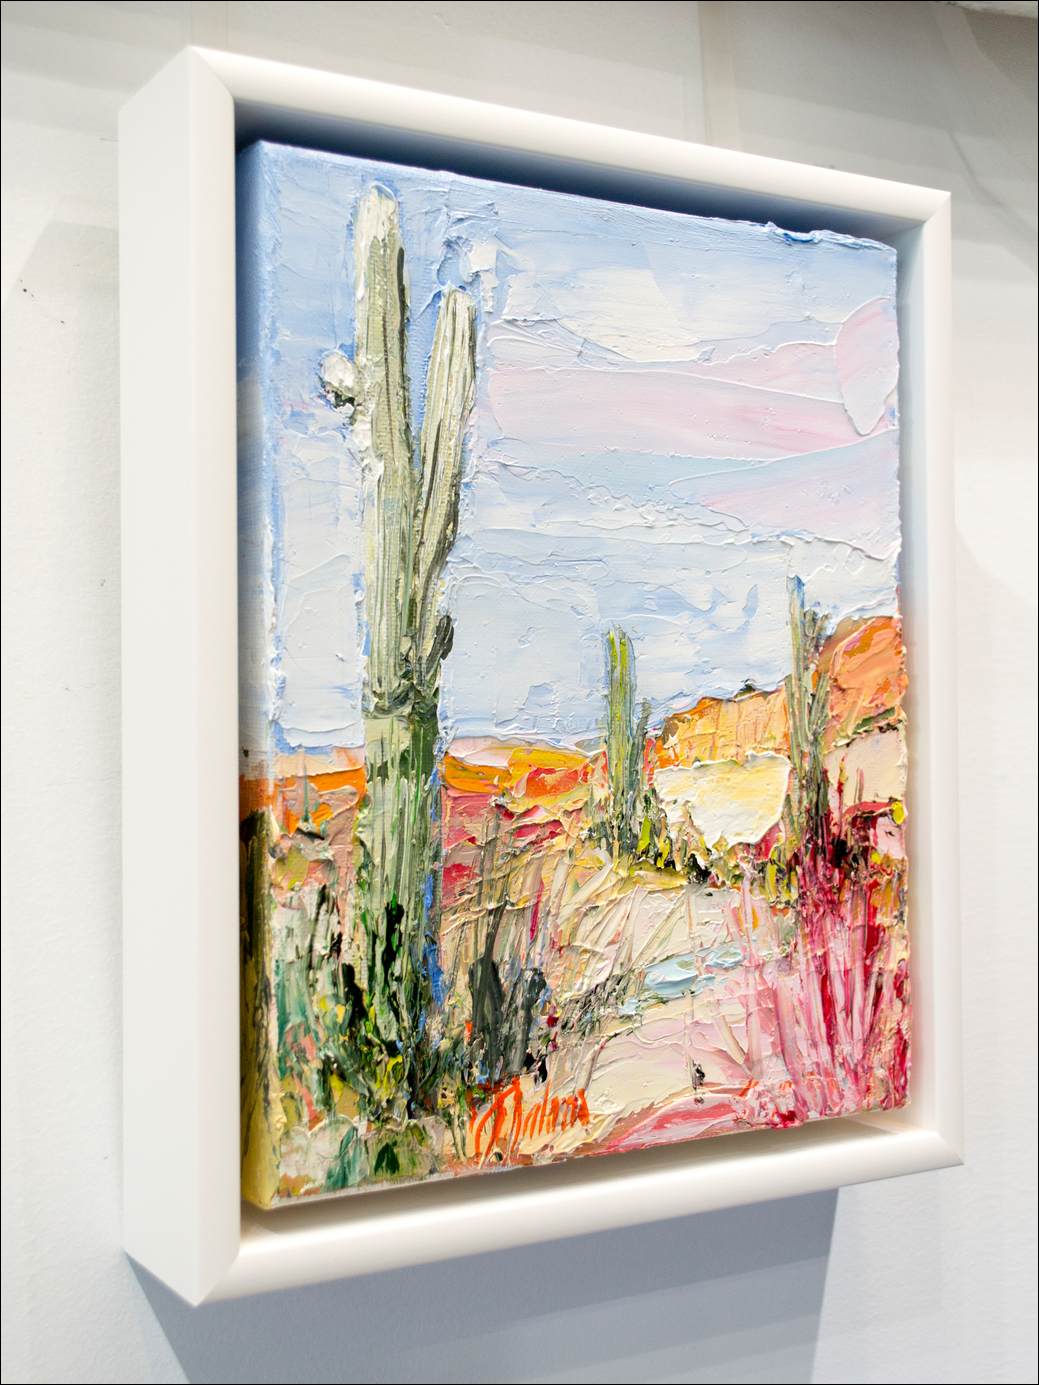 Framed Side View Of Landscape Painting "Desert Off Track Scottsdale Arizona 2" By Judith Dalozzo